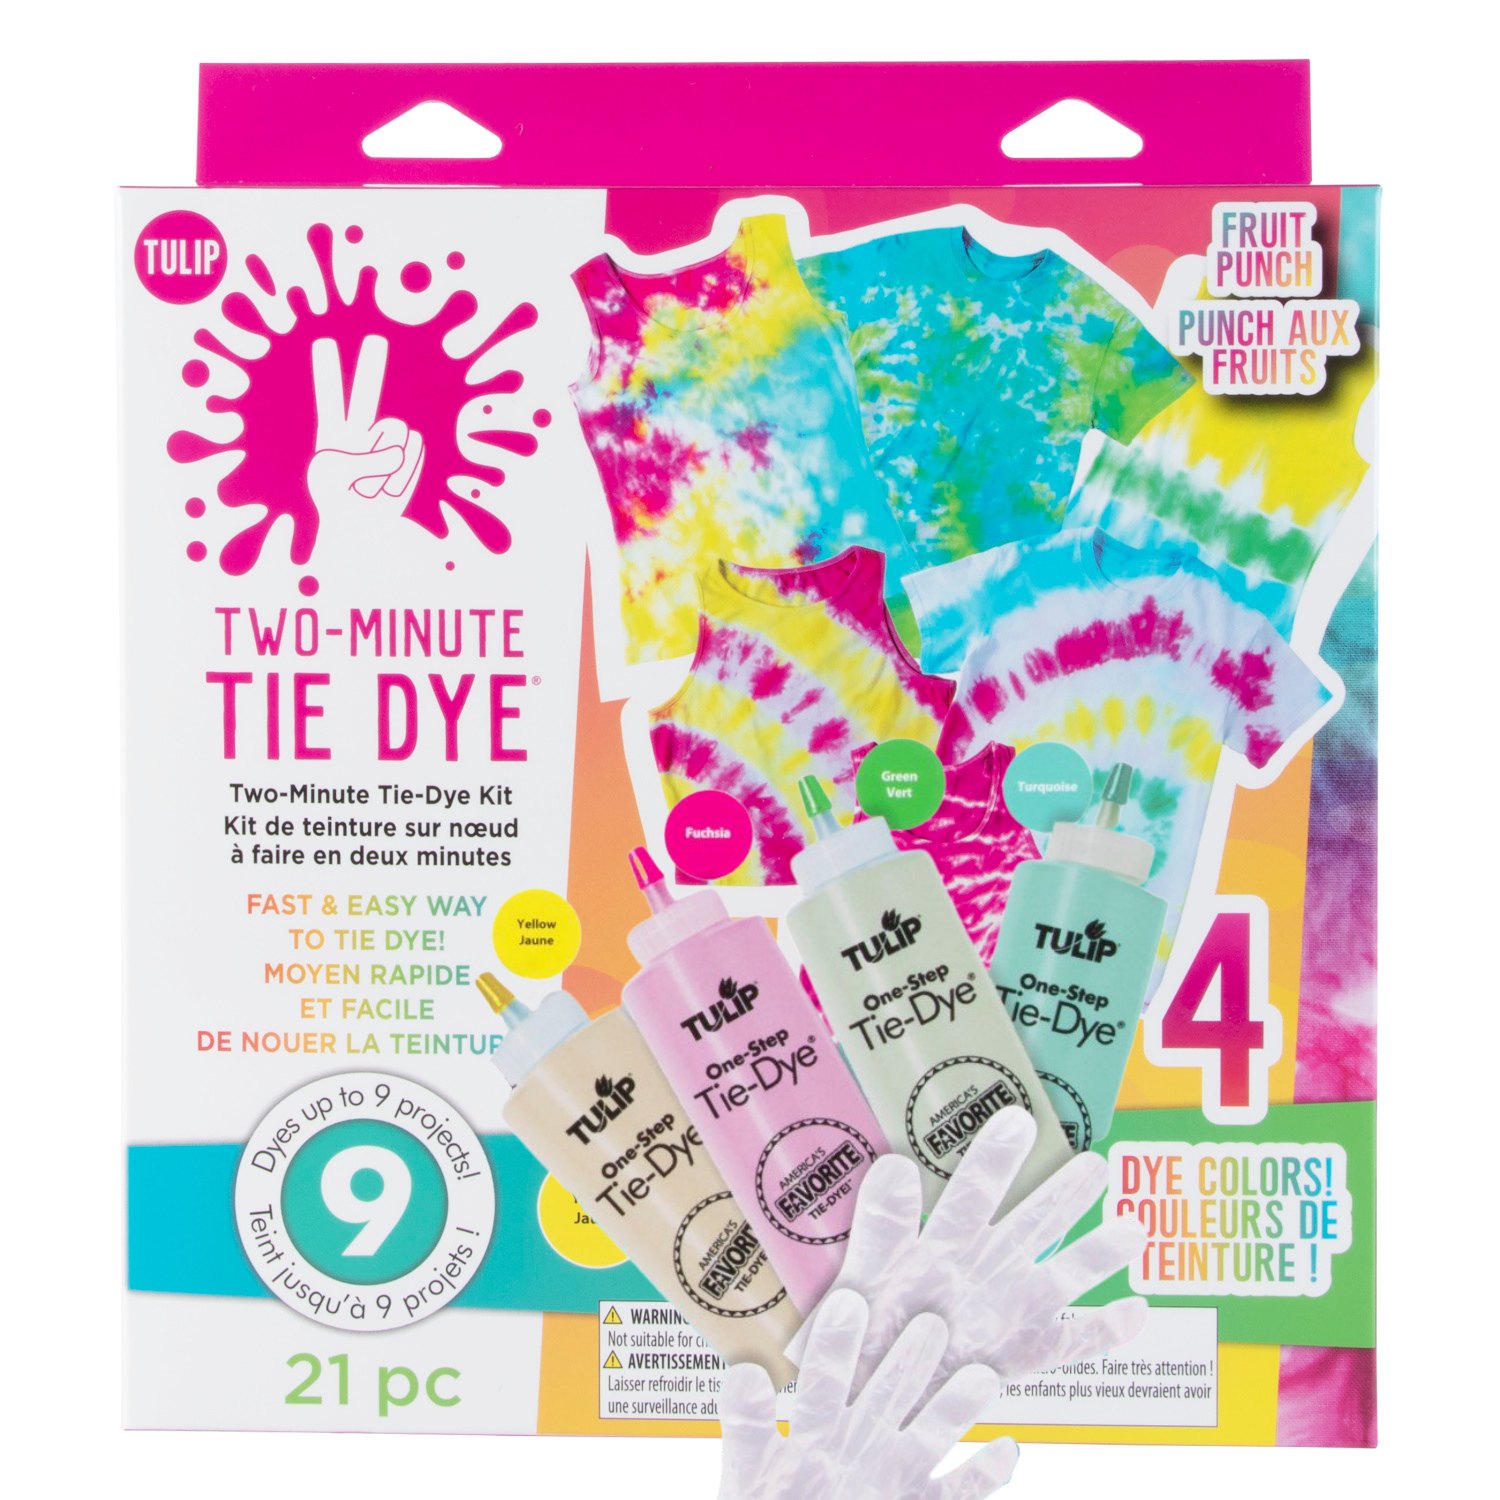 Tulip Two-Minute Tie Dye 4 Color Kit Fruit Punch - image 1 of 9